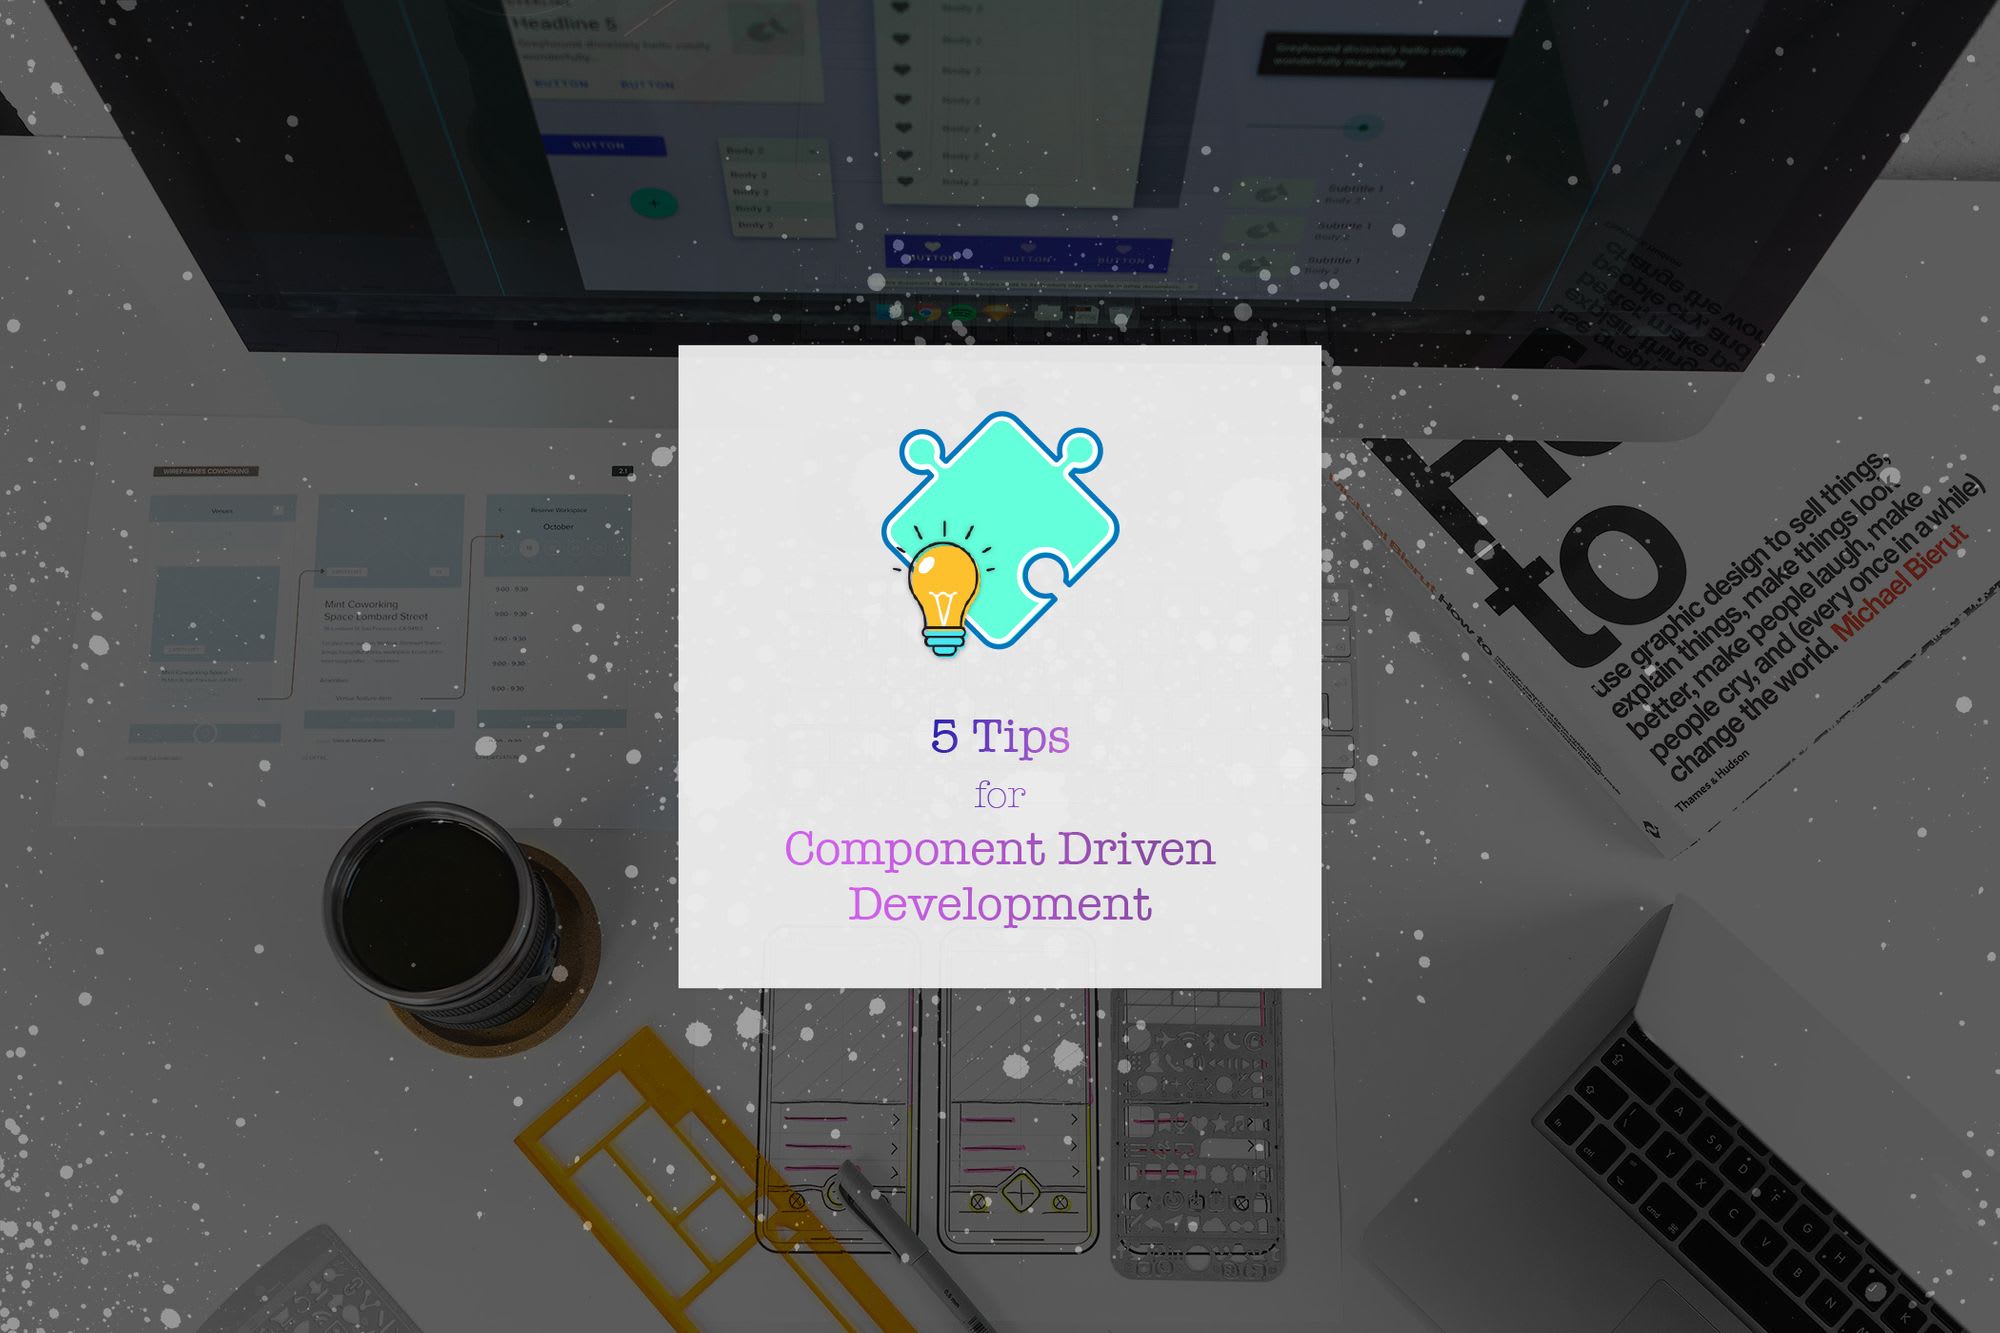 5 Tips for Component Driven Development